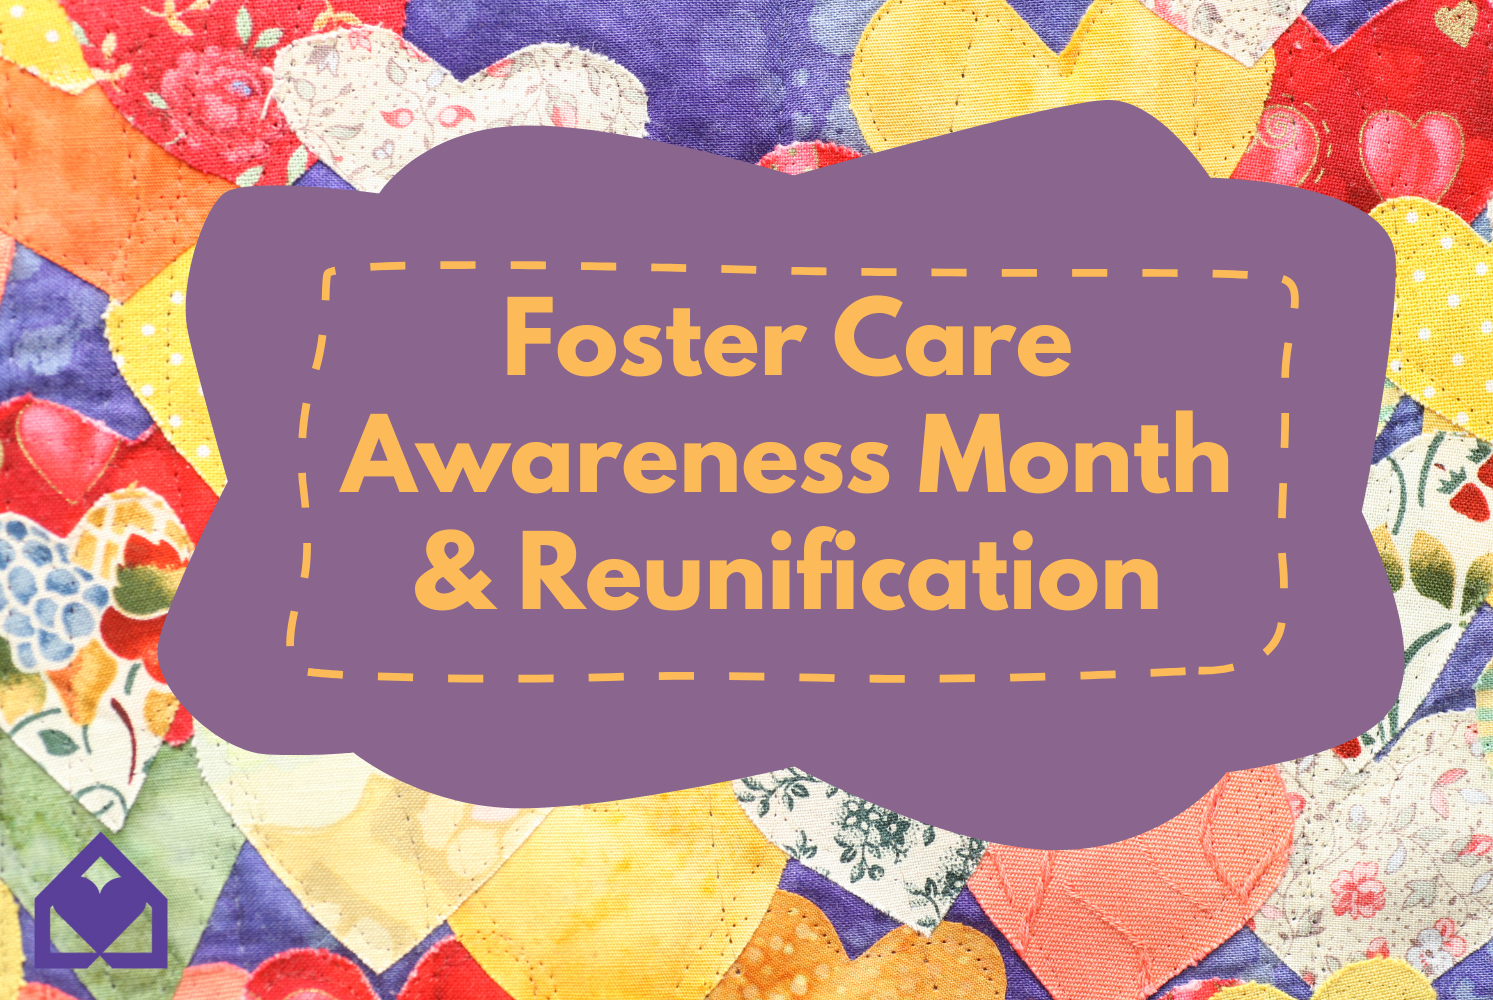 Foster Care Awareness Month and Reunification